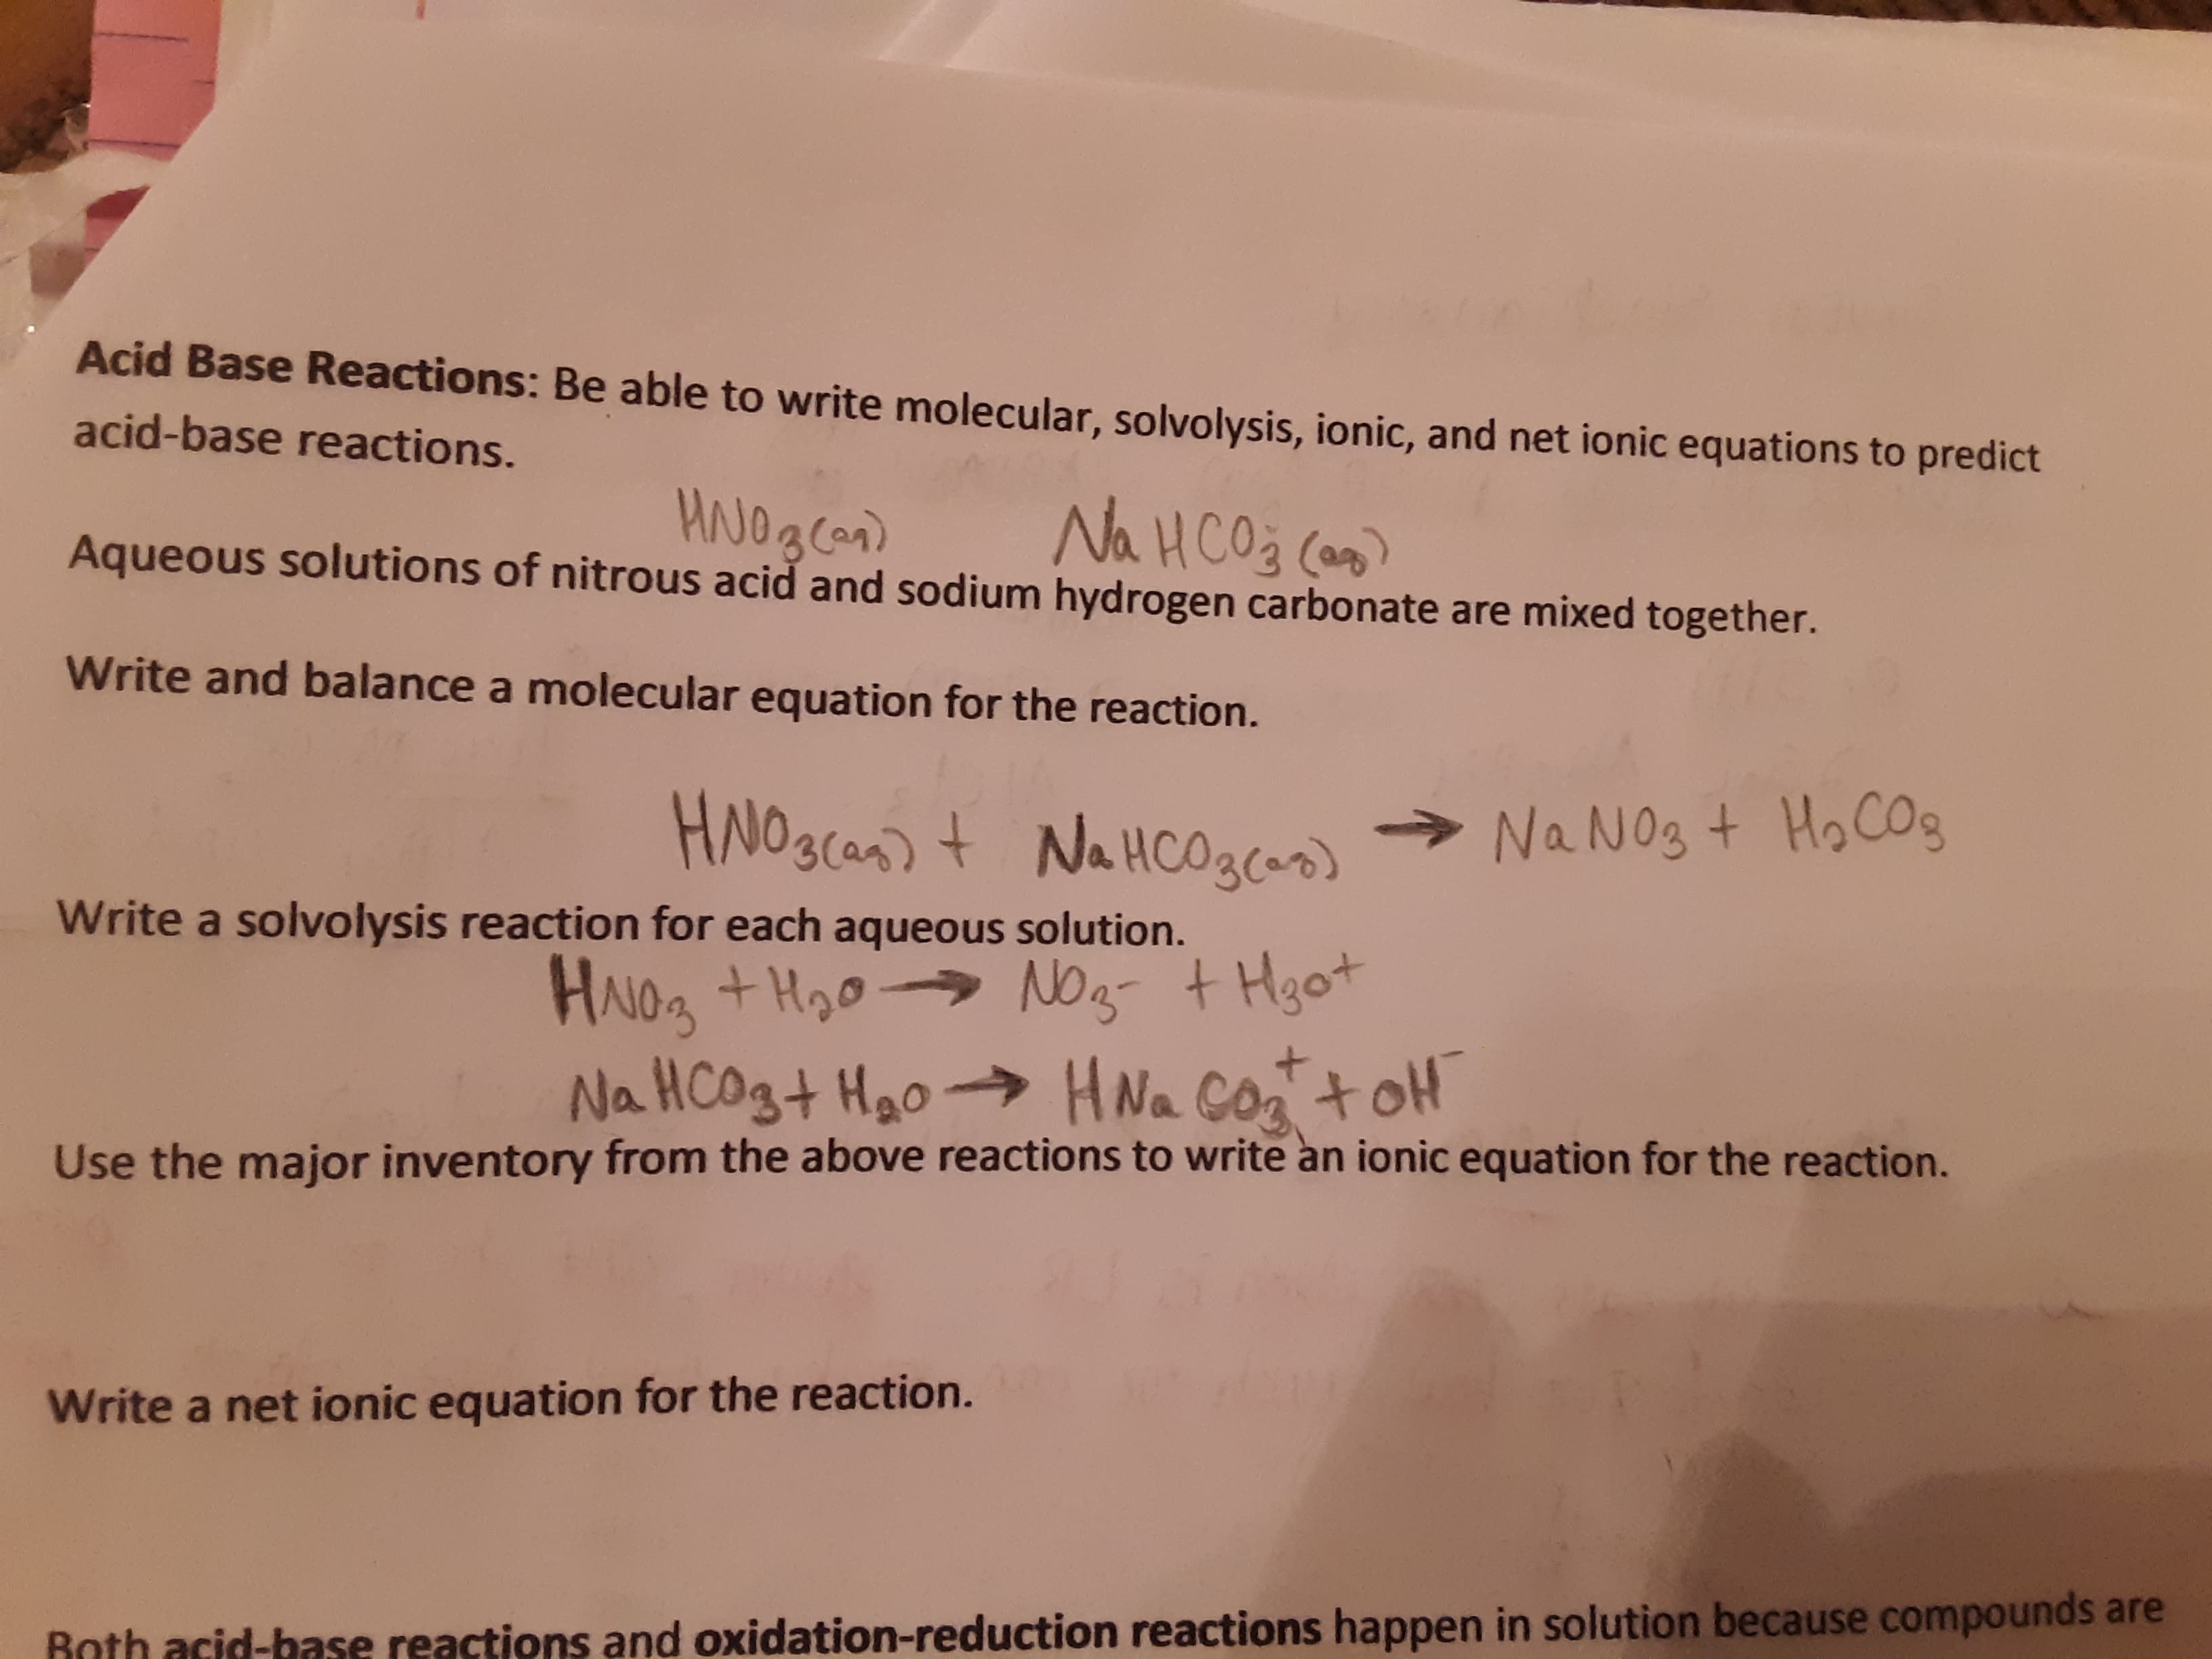 Acid Base Reactions: Be able to write molecular, solvolysis, ionic, and net ionic equations to predict
acid-base reactions.
Na HCO3 Can
Aqueous solutions of nitrous acid and sodium hydrogen carbonate are mixed together.
Write and ba lance a molecu lar equation for the reaction.
HNO3(as) t NaHCO3)
Na No3 t HoCOg
Write a solvolysis reaction for each aqueous solution.
HAIOa +Hoo No
Na HCOgt Hao-
tHgot
HNa CoatoH
Use the major inventory from the above reactions to write an ionic equation for the reaction.
Write a net ionic equation for the reaction.
Rnth acid-base reactions and oxidation-reduction reactions happen in solution because compounds are
